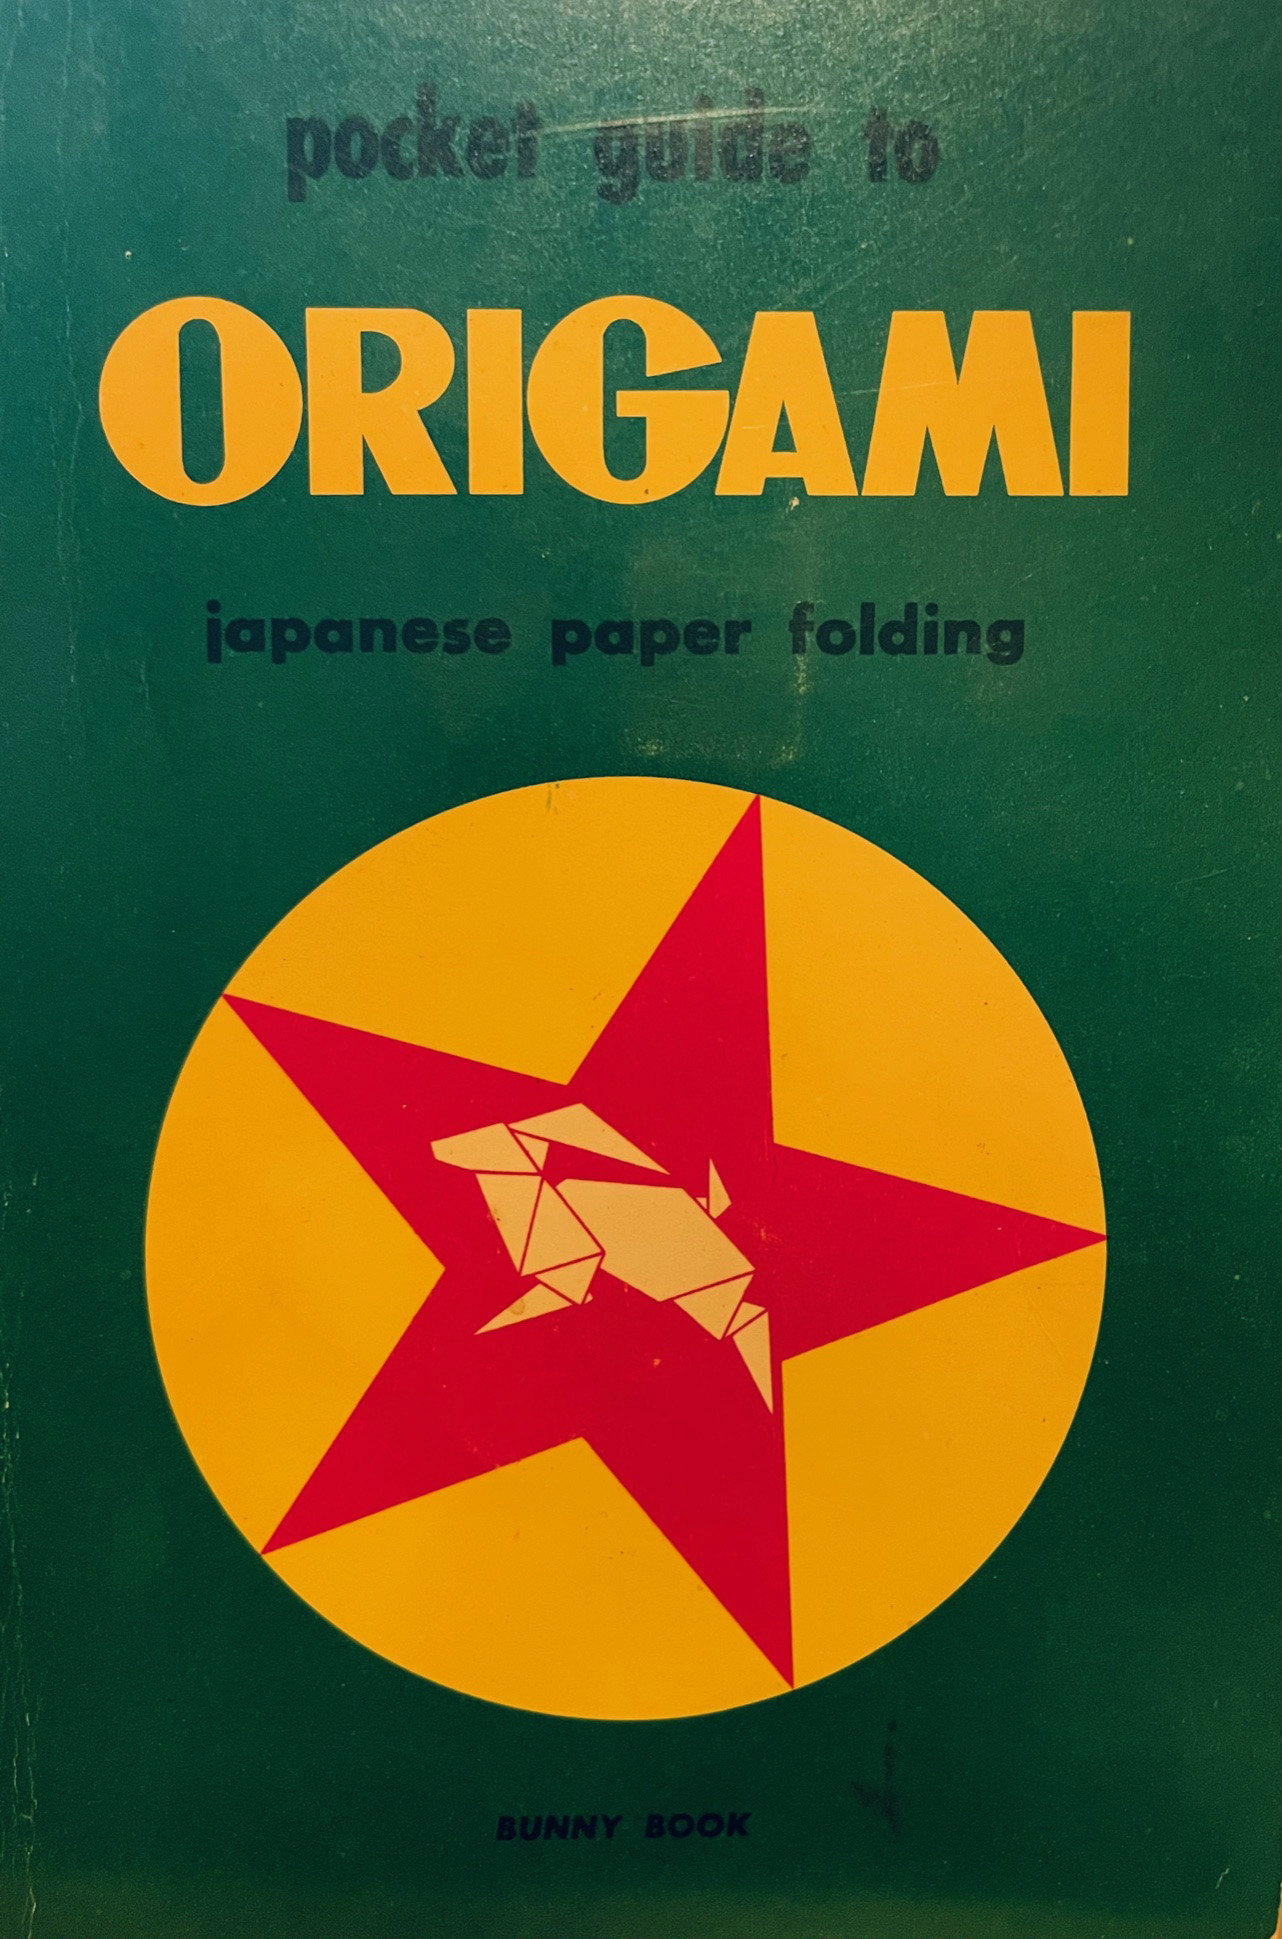 Pocket Guide to Origami - Bunny Book : page 20.